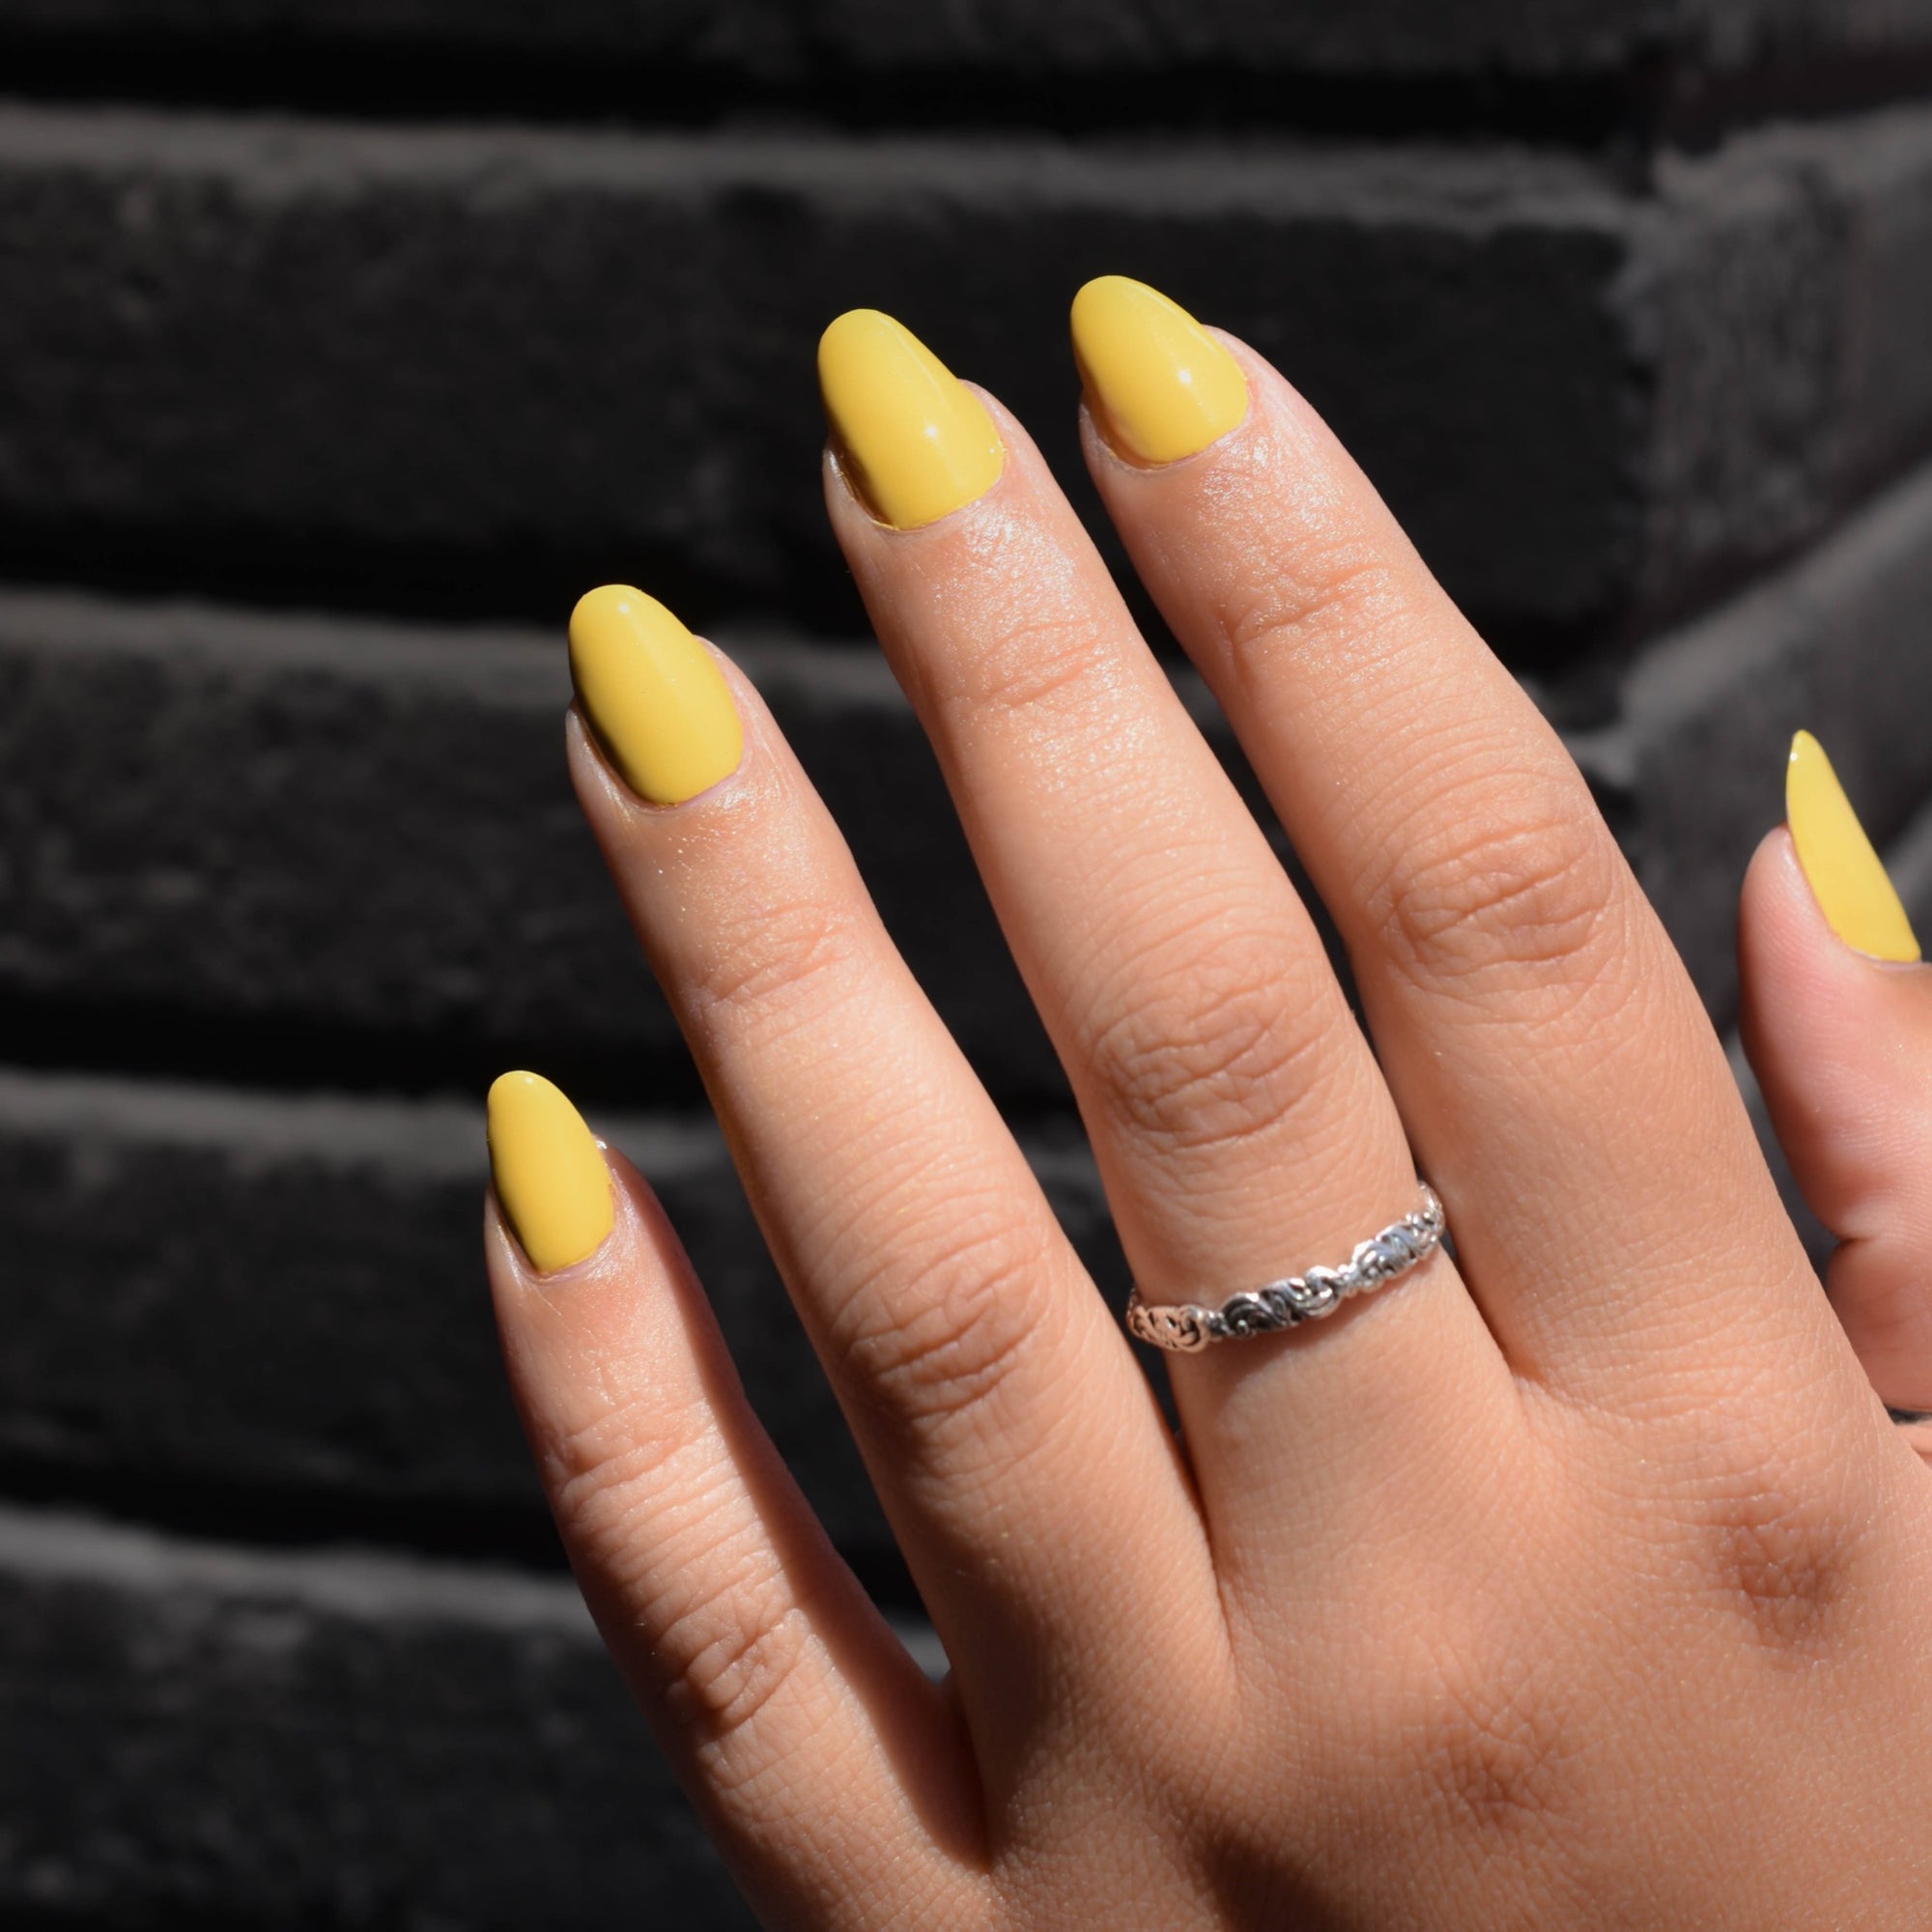 a close of of a model's hand wearing Over Easy nail polish from Hello birdie in a deep yellow hue. One finger has a silver ring and daylight illuminates it against an out of focus black brick corner background.